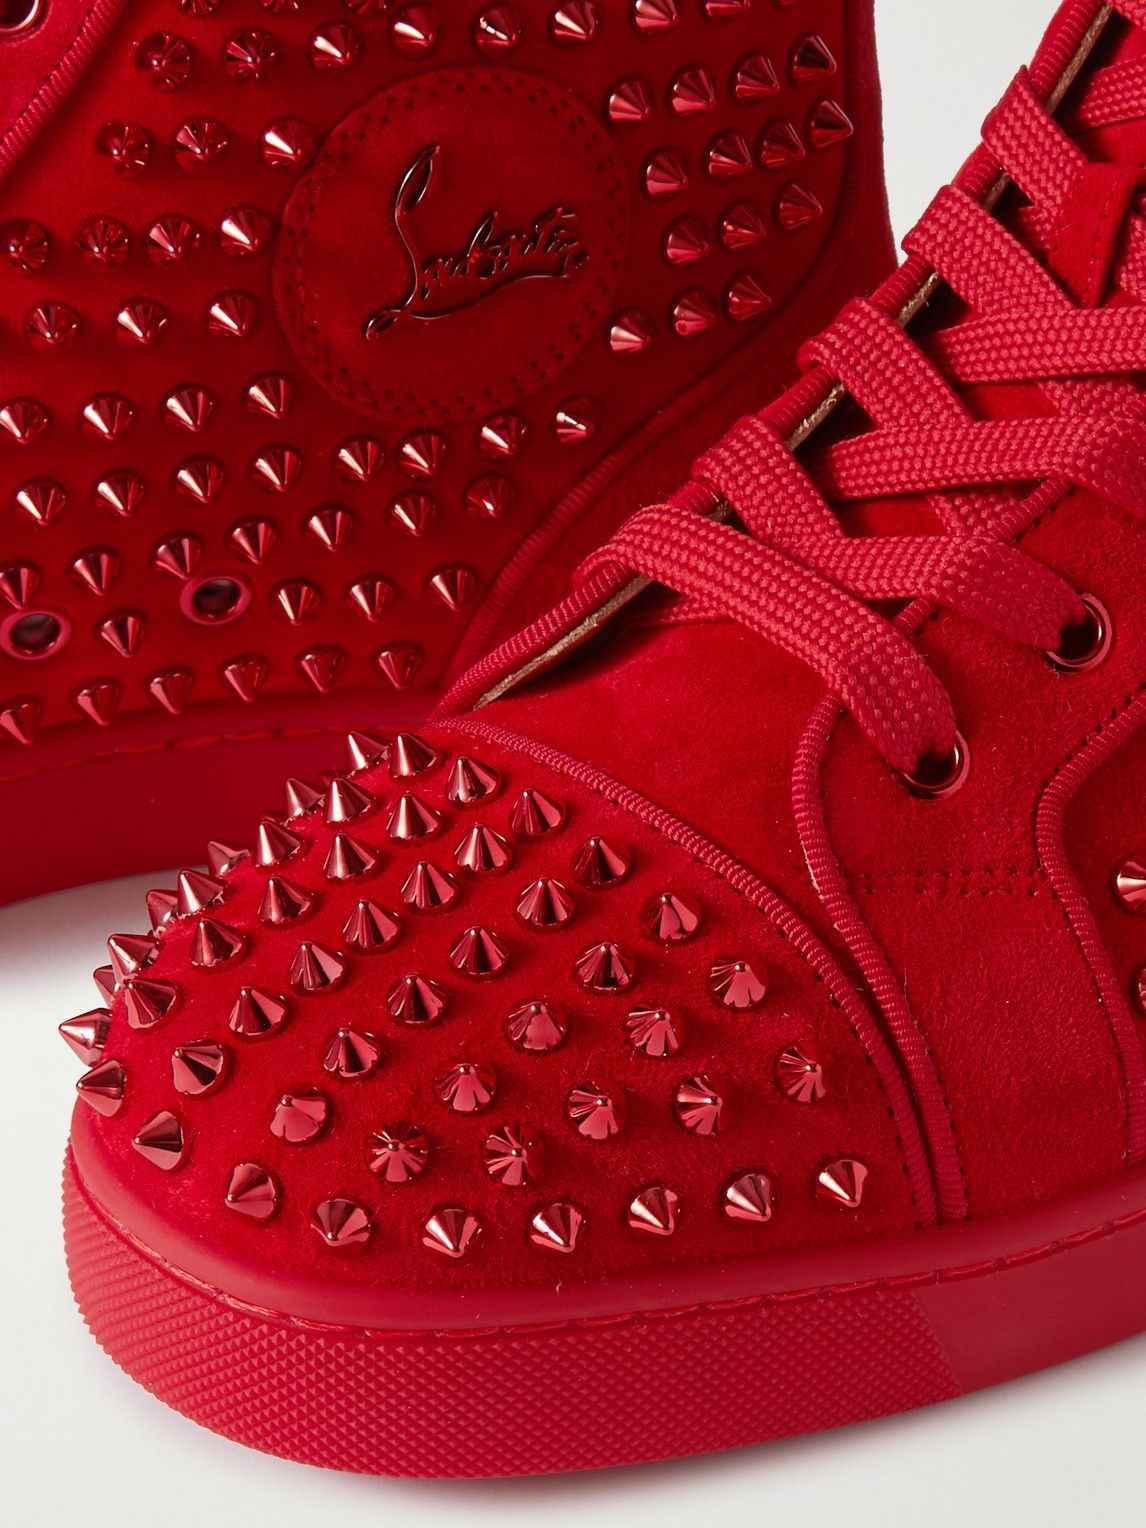 Christian Louboutin - Louis Orlato Spiked Suede High-Top Sneakers